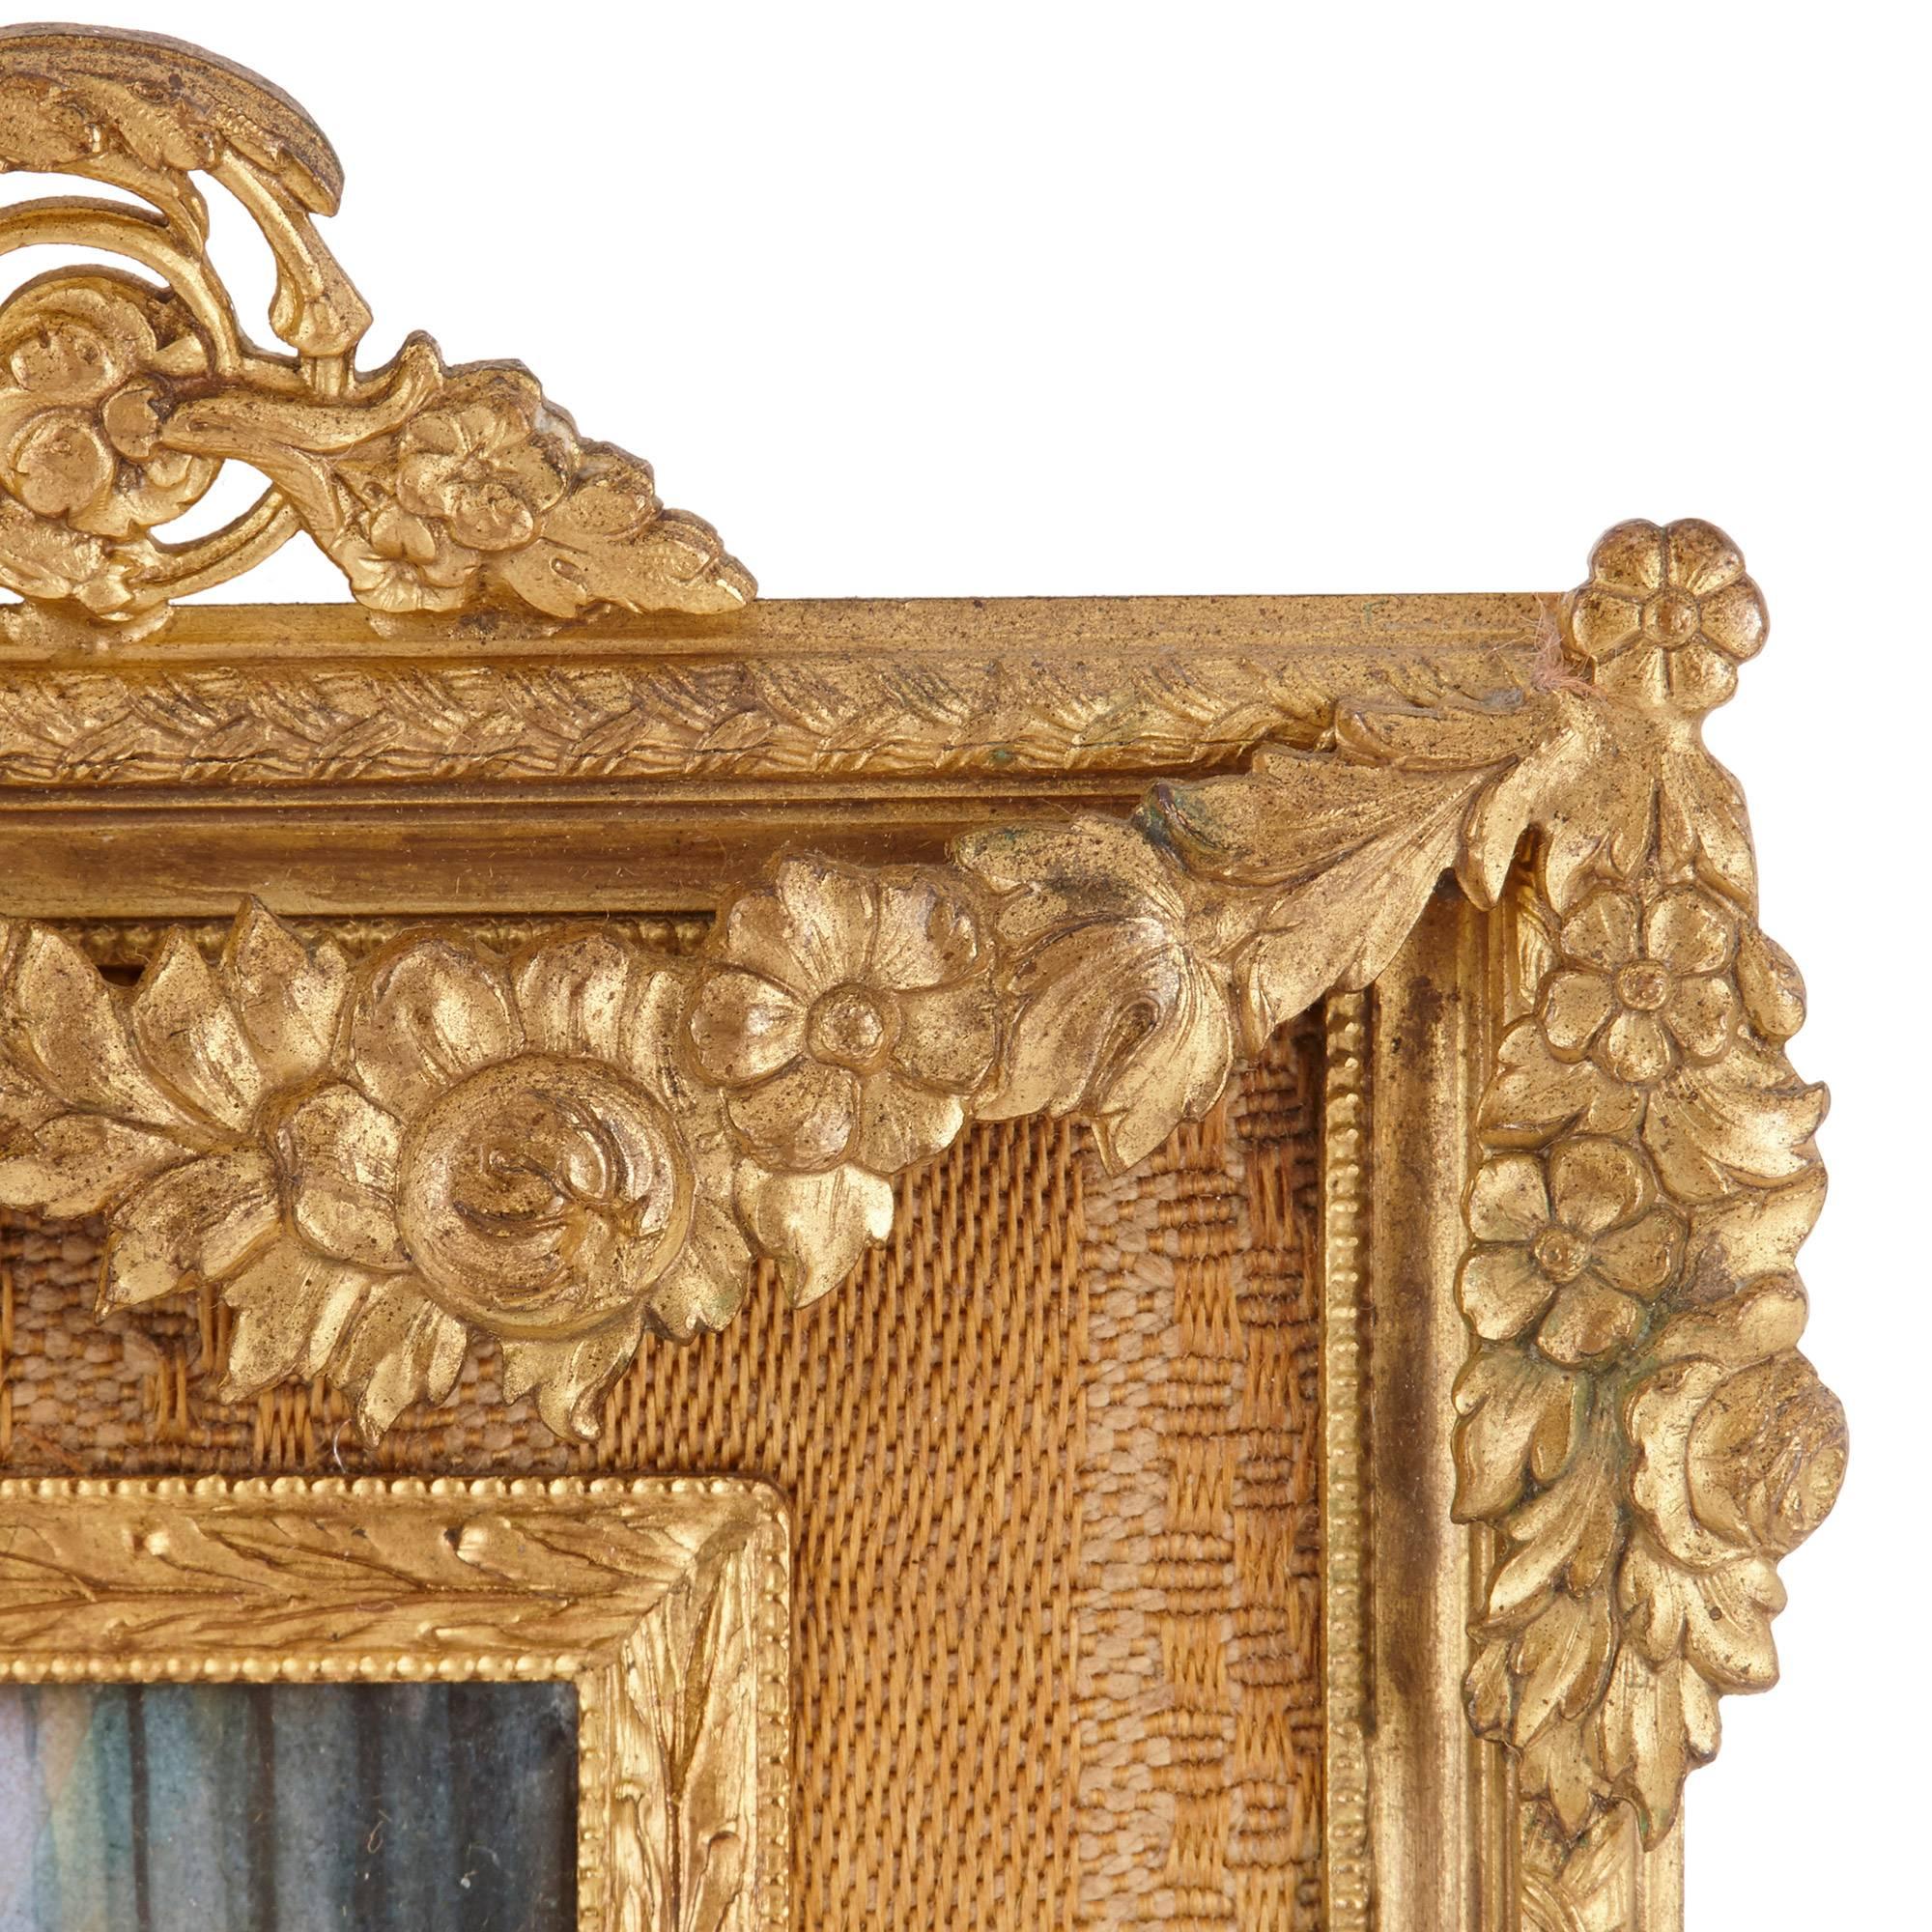 19th Century French Limoges Enamel Plaque in Gilt Bronze Frame For Sale 2